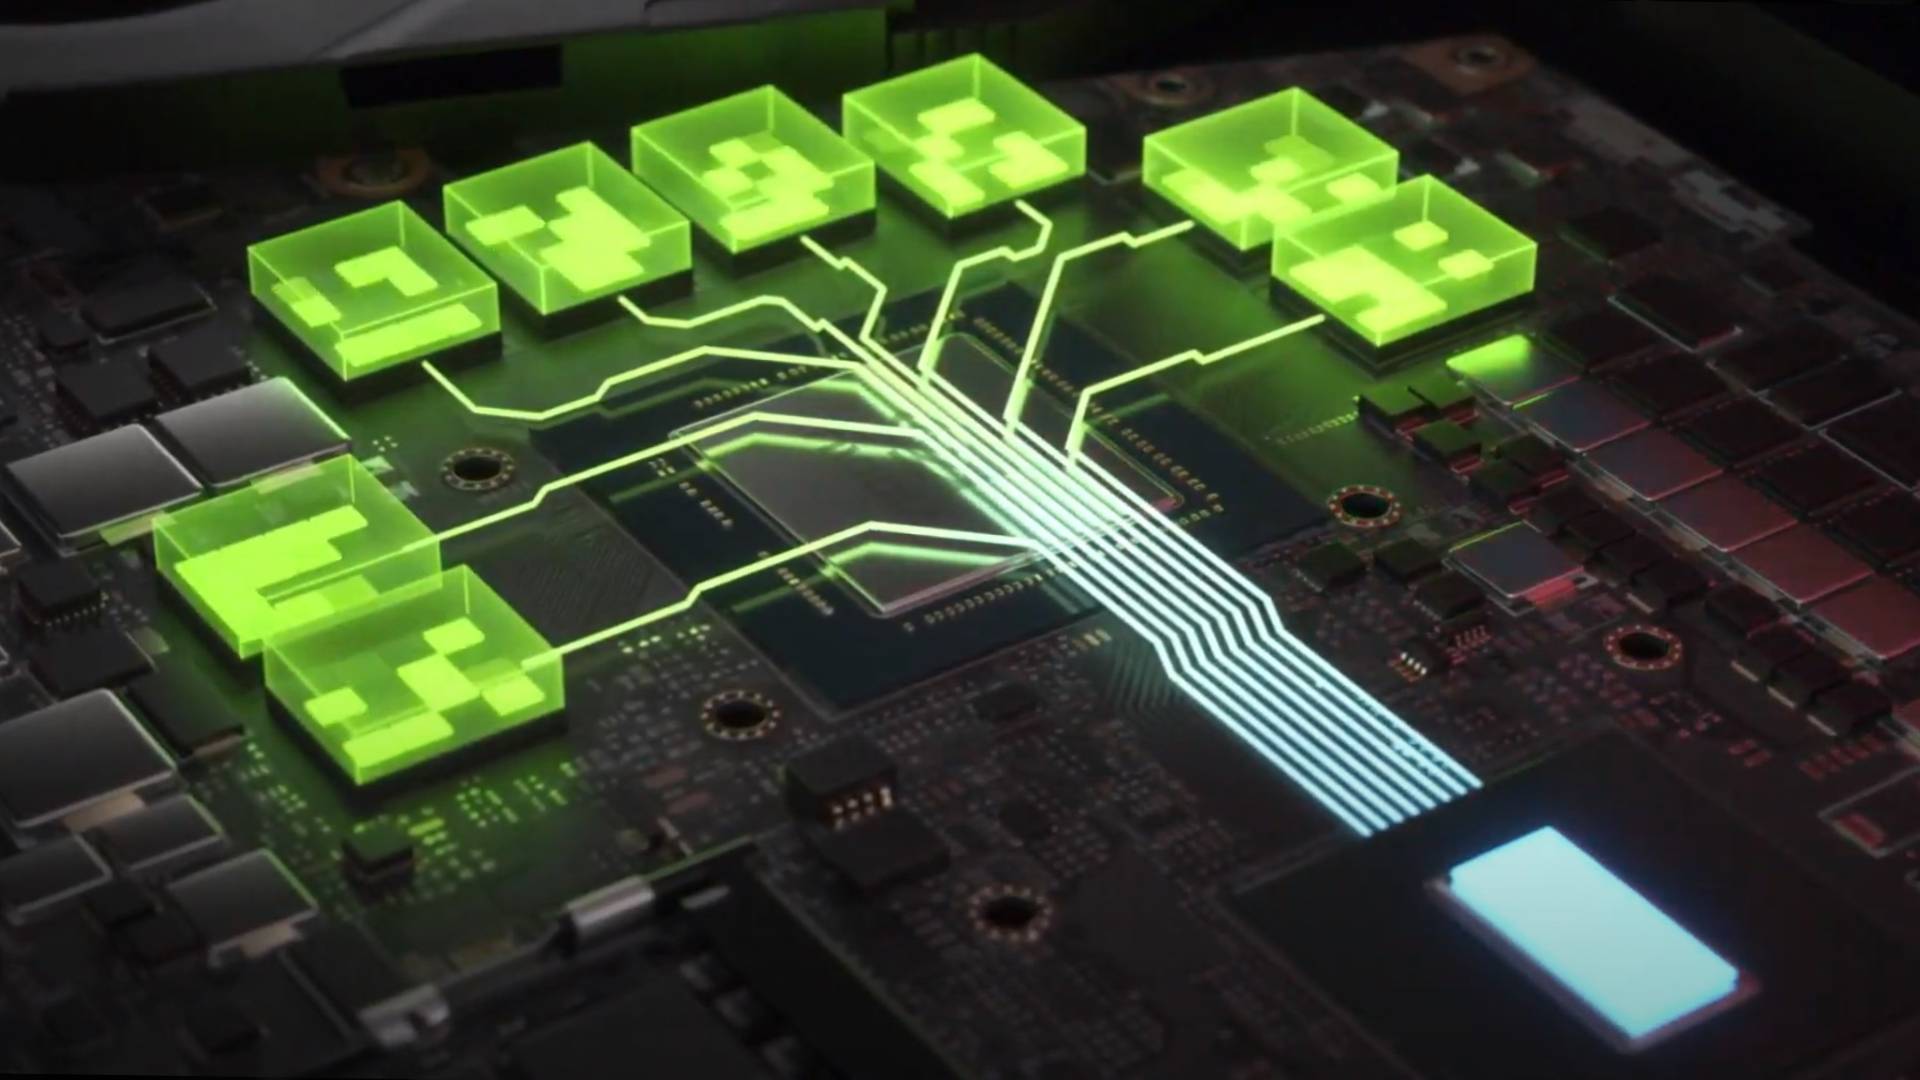 Nvidia could spend $10 billion to secure RTX 4000 components